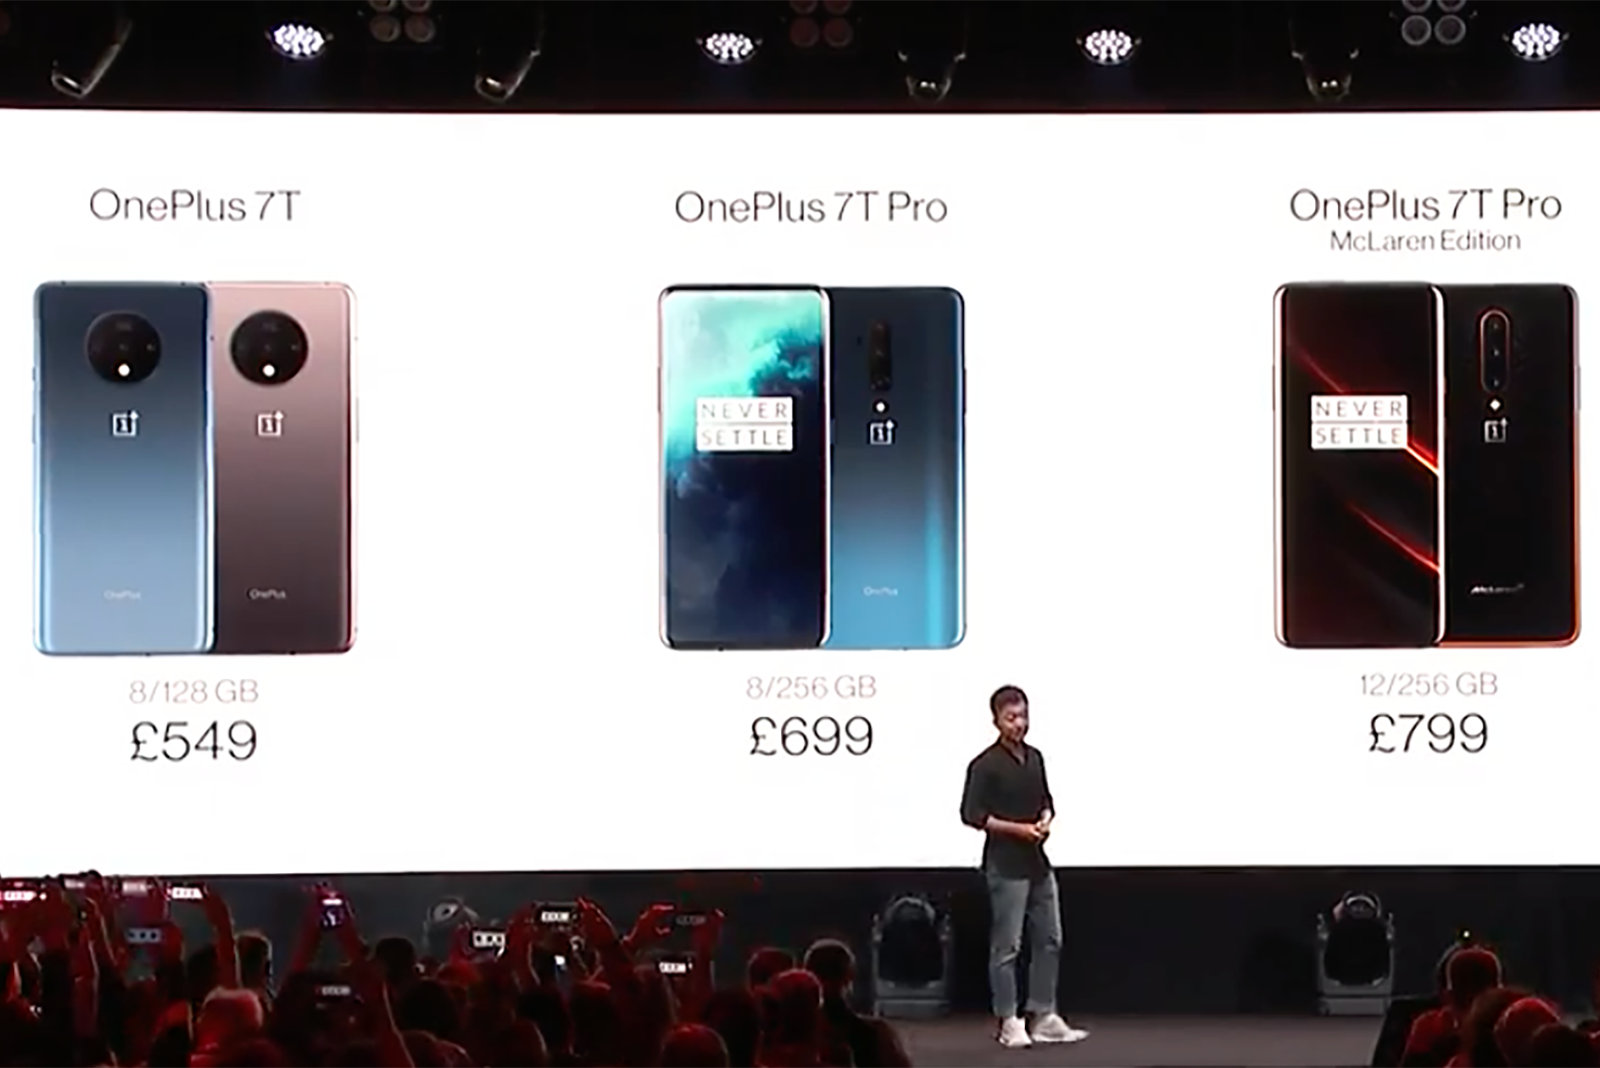 OnePlus gives the new OnePlus 7T Pro the McLaren treatment image 2